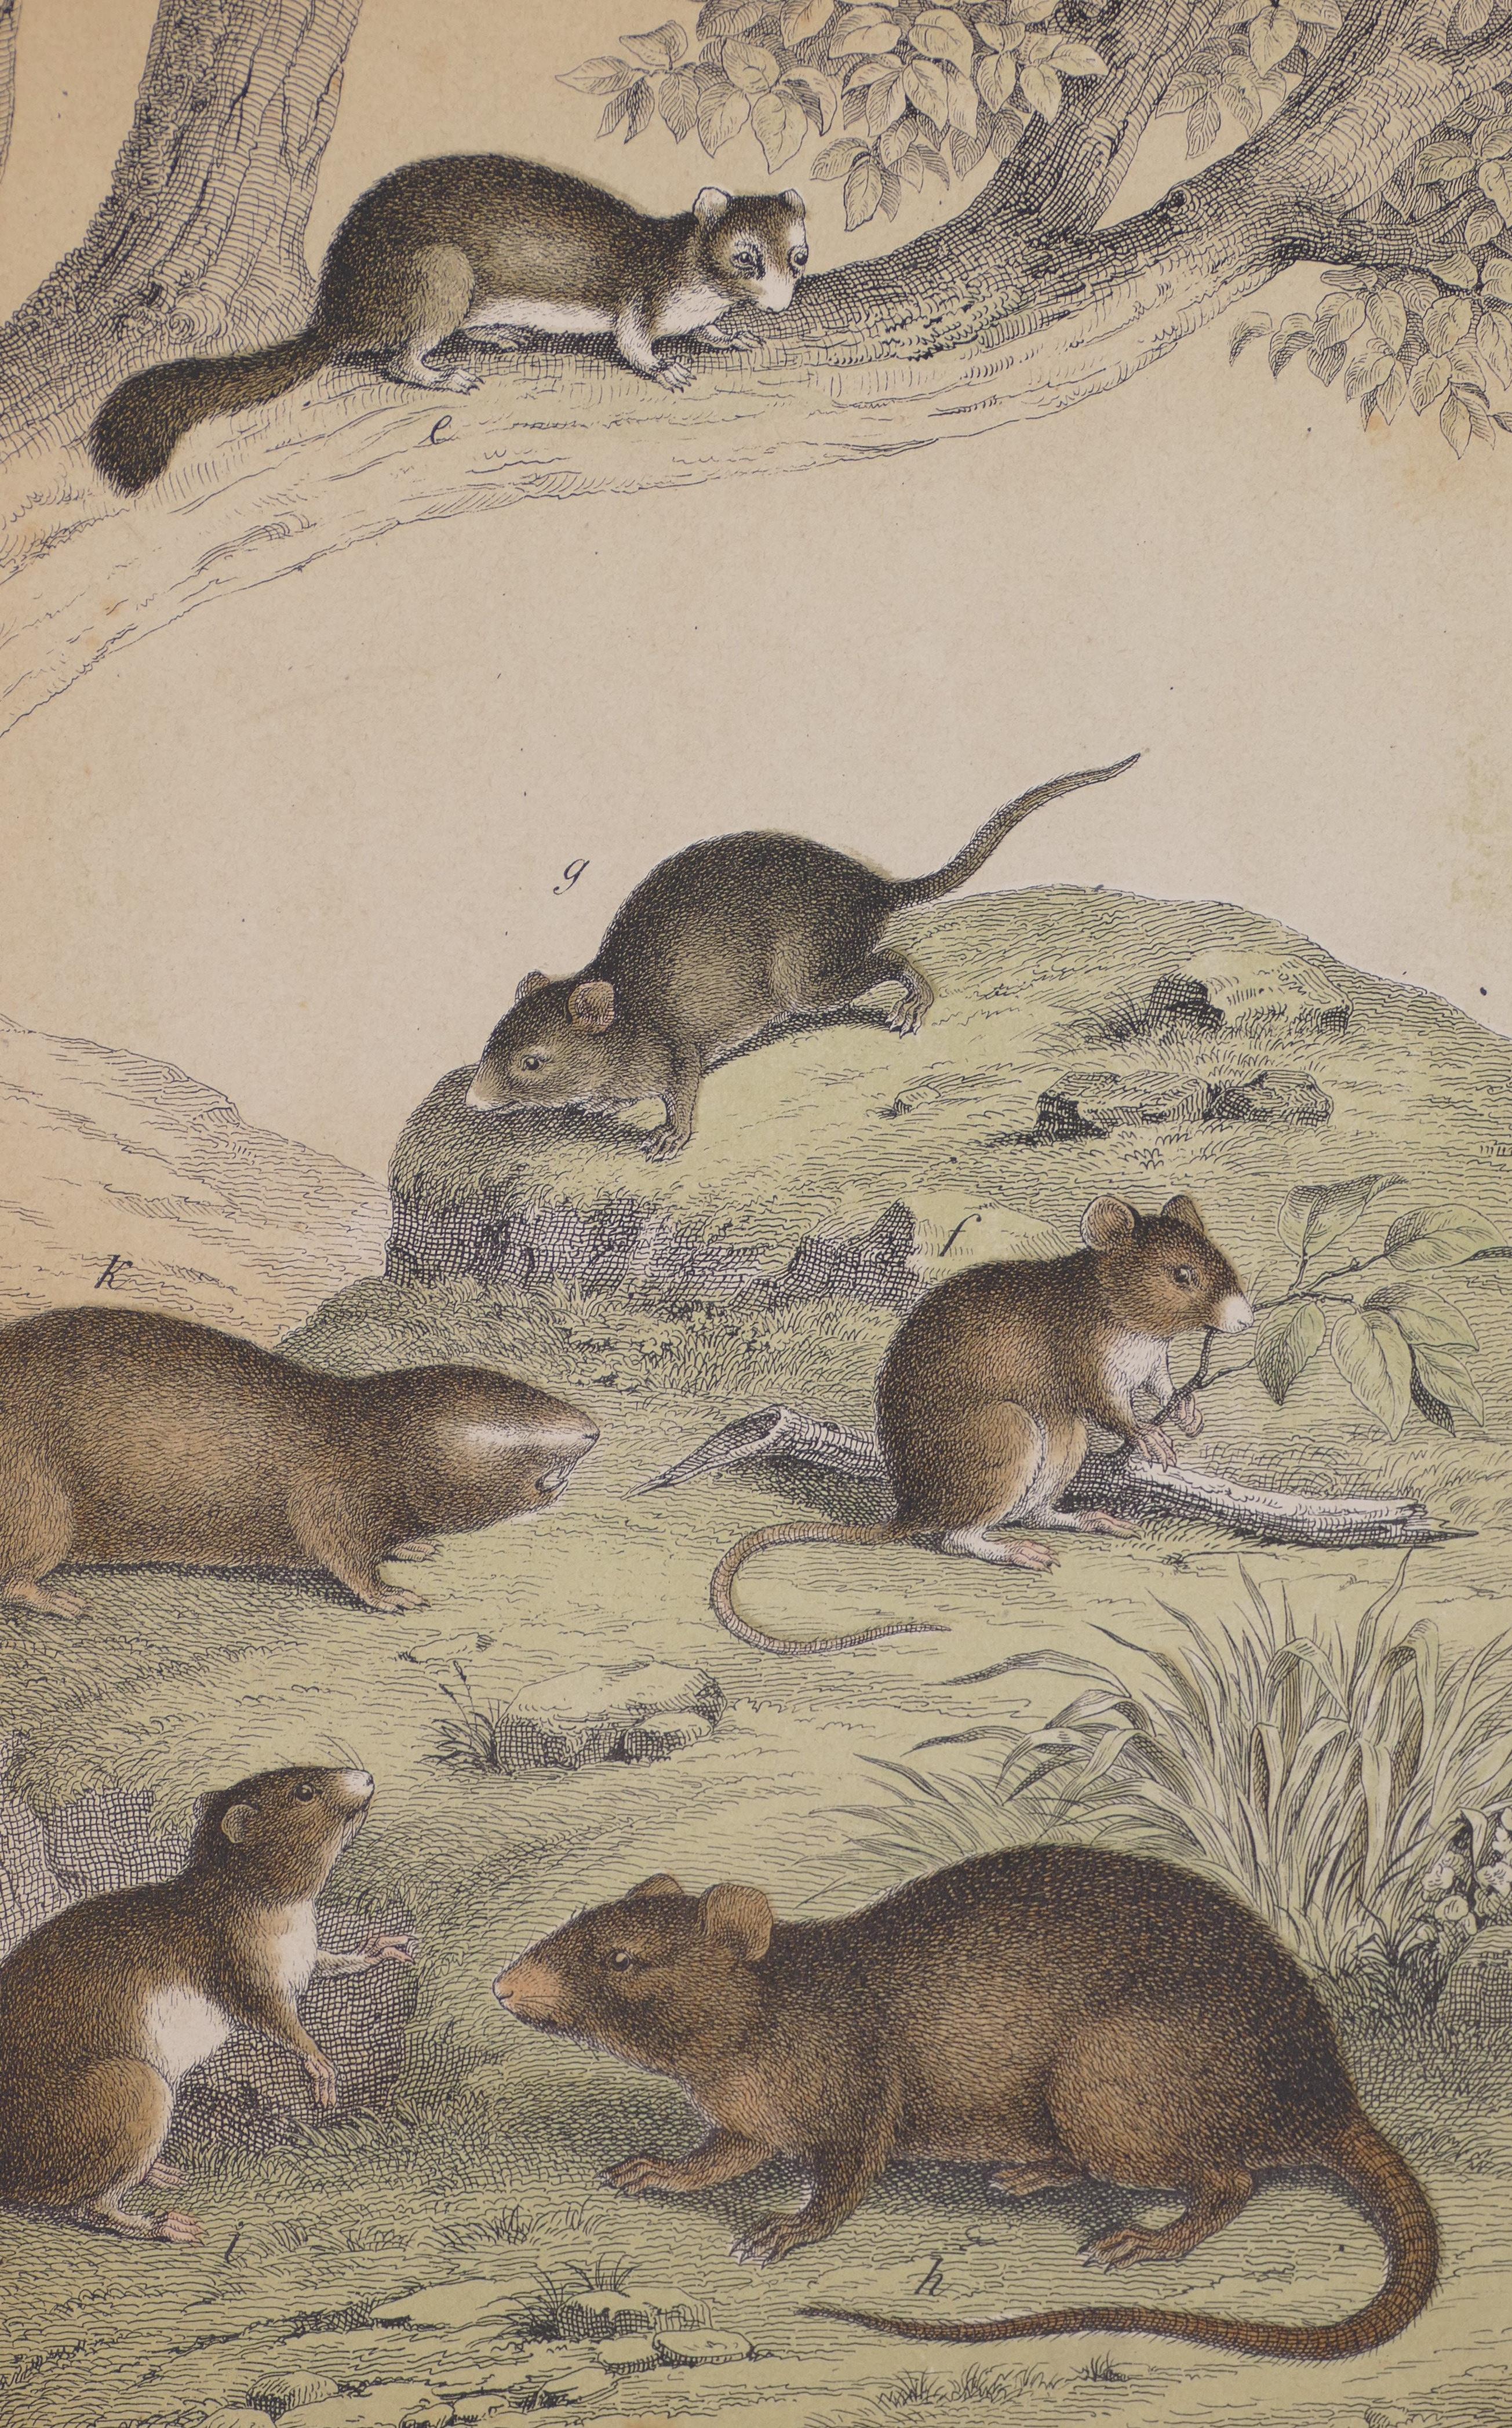 Unknown Figurative Print - Small Rodents - Original Lithograph - Late 19th Century